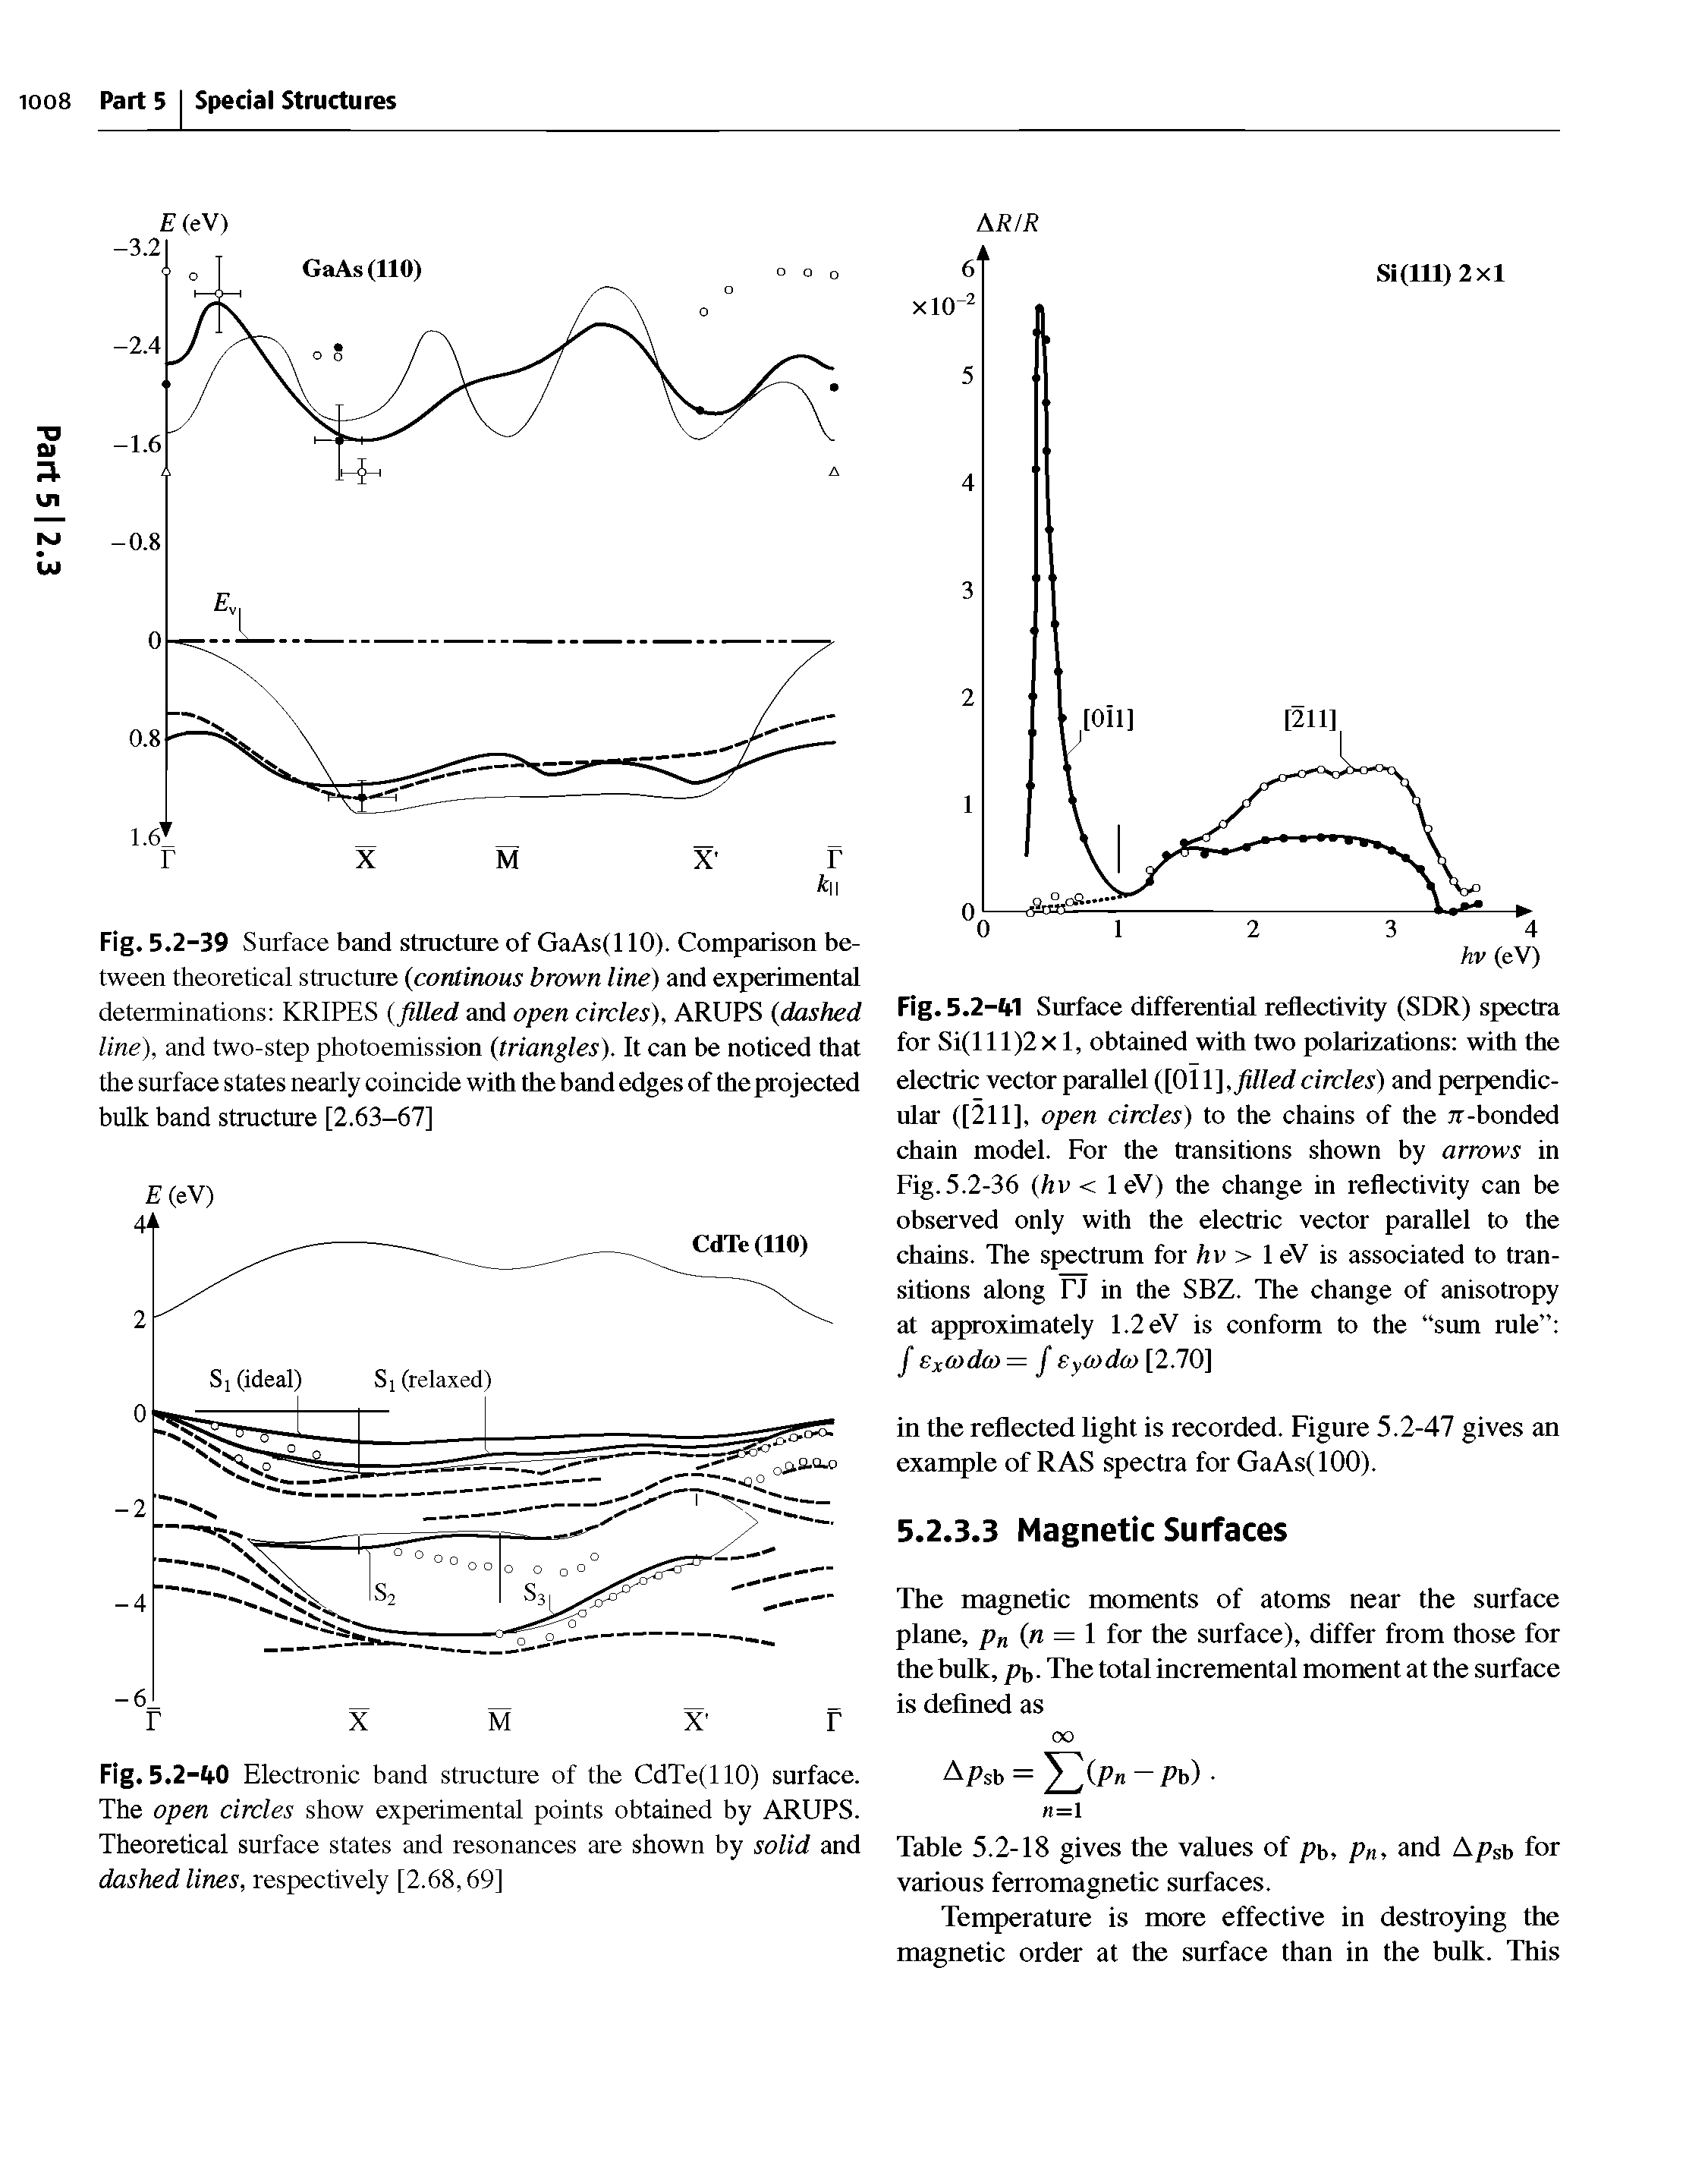 Fig. 5.2-39 Surface band structure of GaAs(l 10). Comparison between theoretical structure (continous brown line) and experimental determinations KRIPES filled and open circles), ARUPS dashed line), and two-step photoemission triangles). It can be noticed that the surface states nearly coincide with the band edges of the projected bulk band structure [2.63-67]...